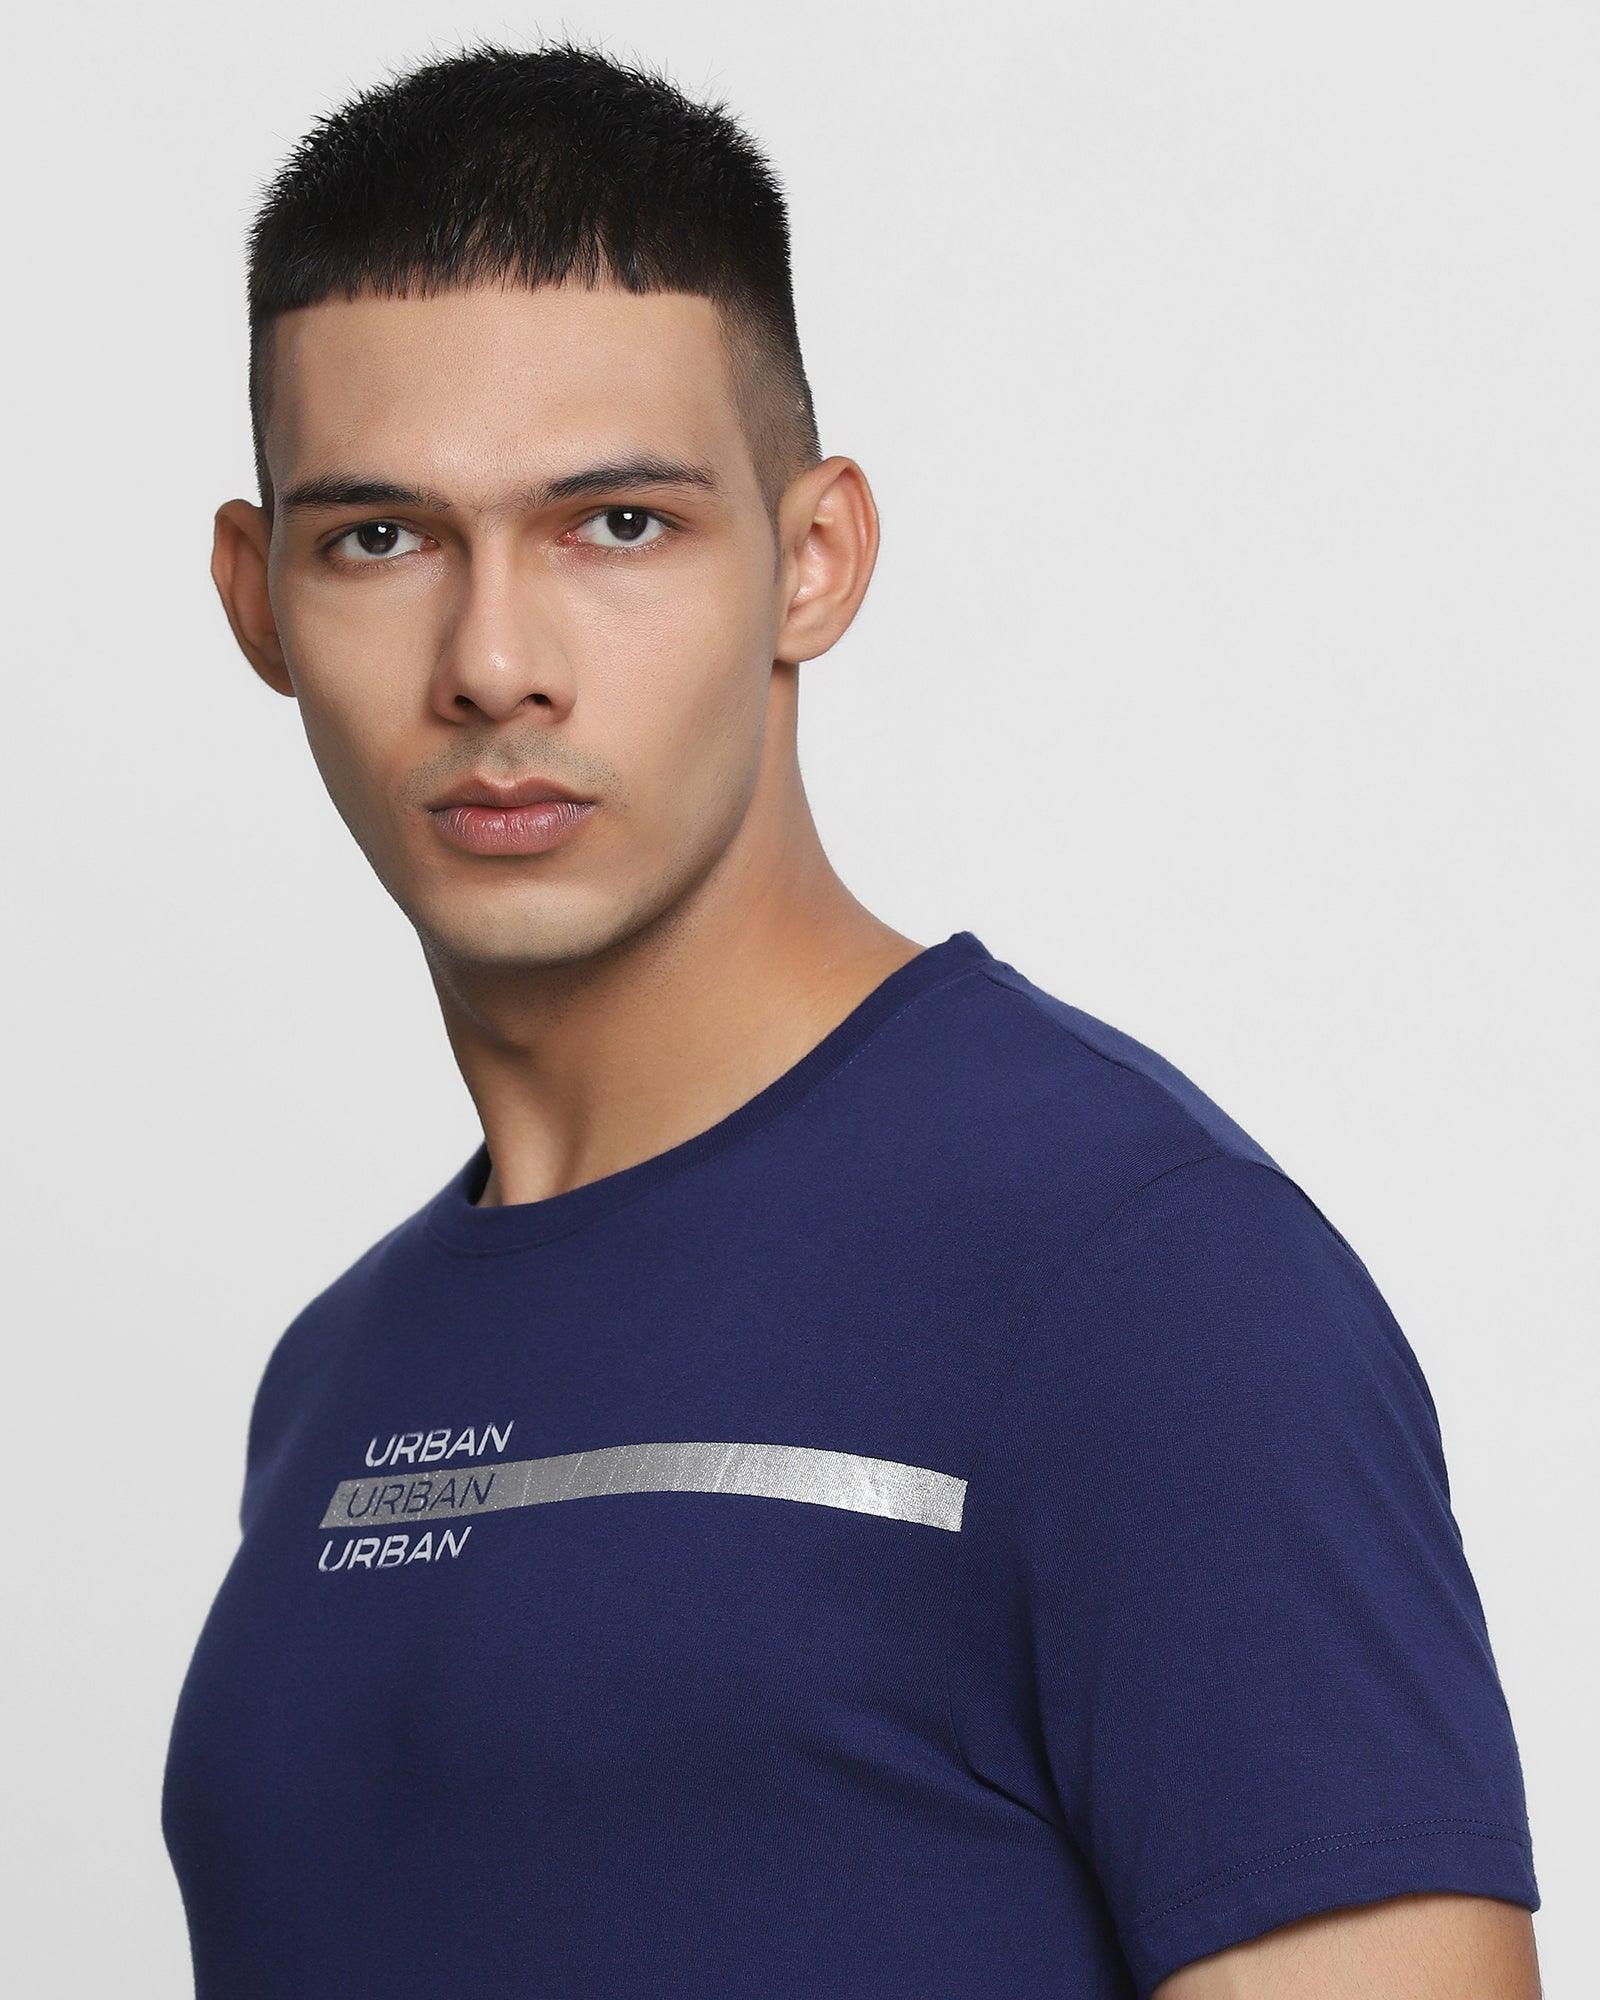 Crew Neck Ink Blue Printed T Shirt - Shade